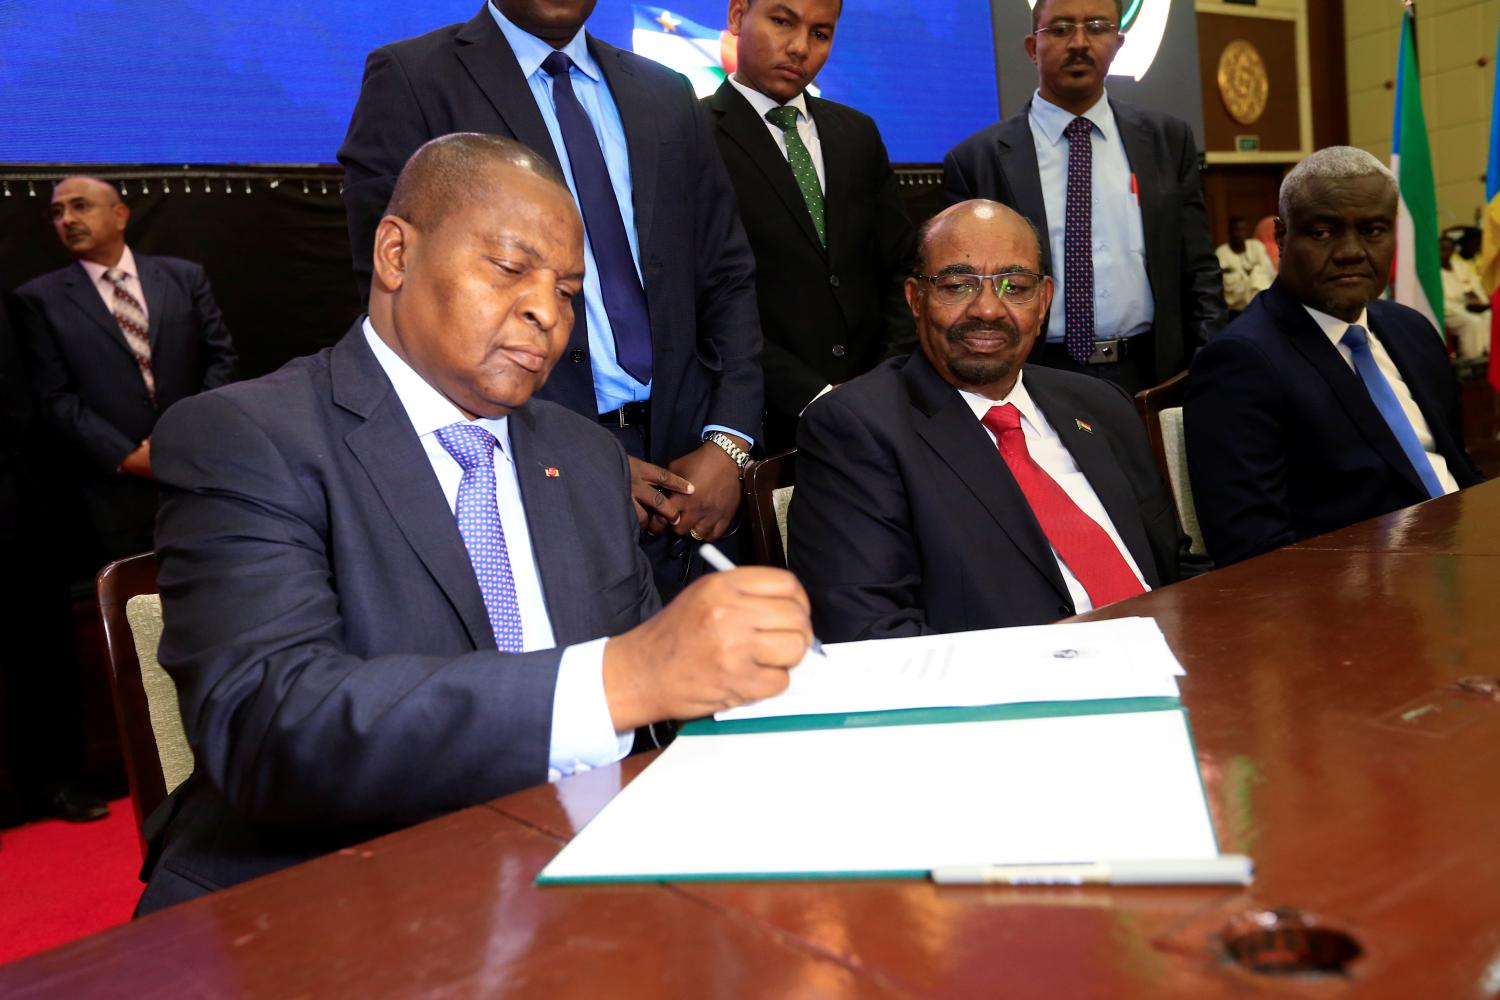 Central African Republic President Faustin Archange Touadera signs a peace deal between the Central African Republic government and 14 armed groups following two weeks of talks in the Sudanese capital Khartoum, Sudan, February 5, 2019. REUTERS/Mohamed Nureldin Abdallah - RC145AE69E40